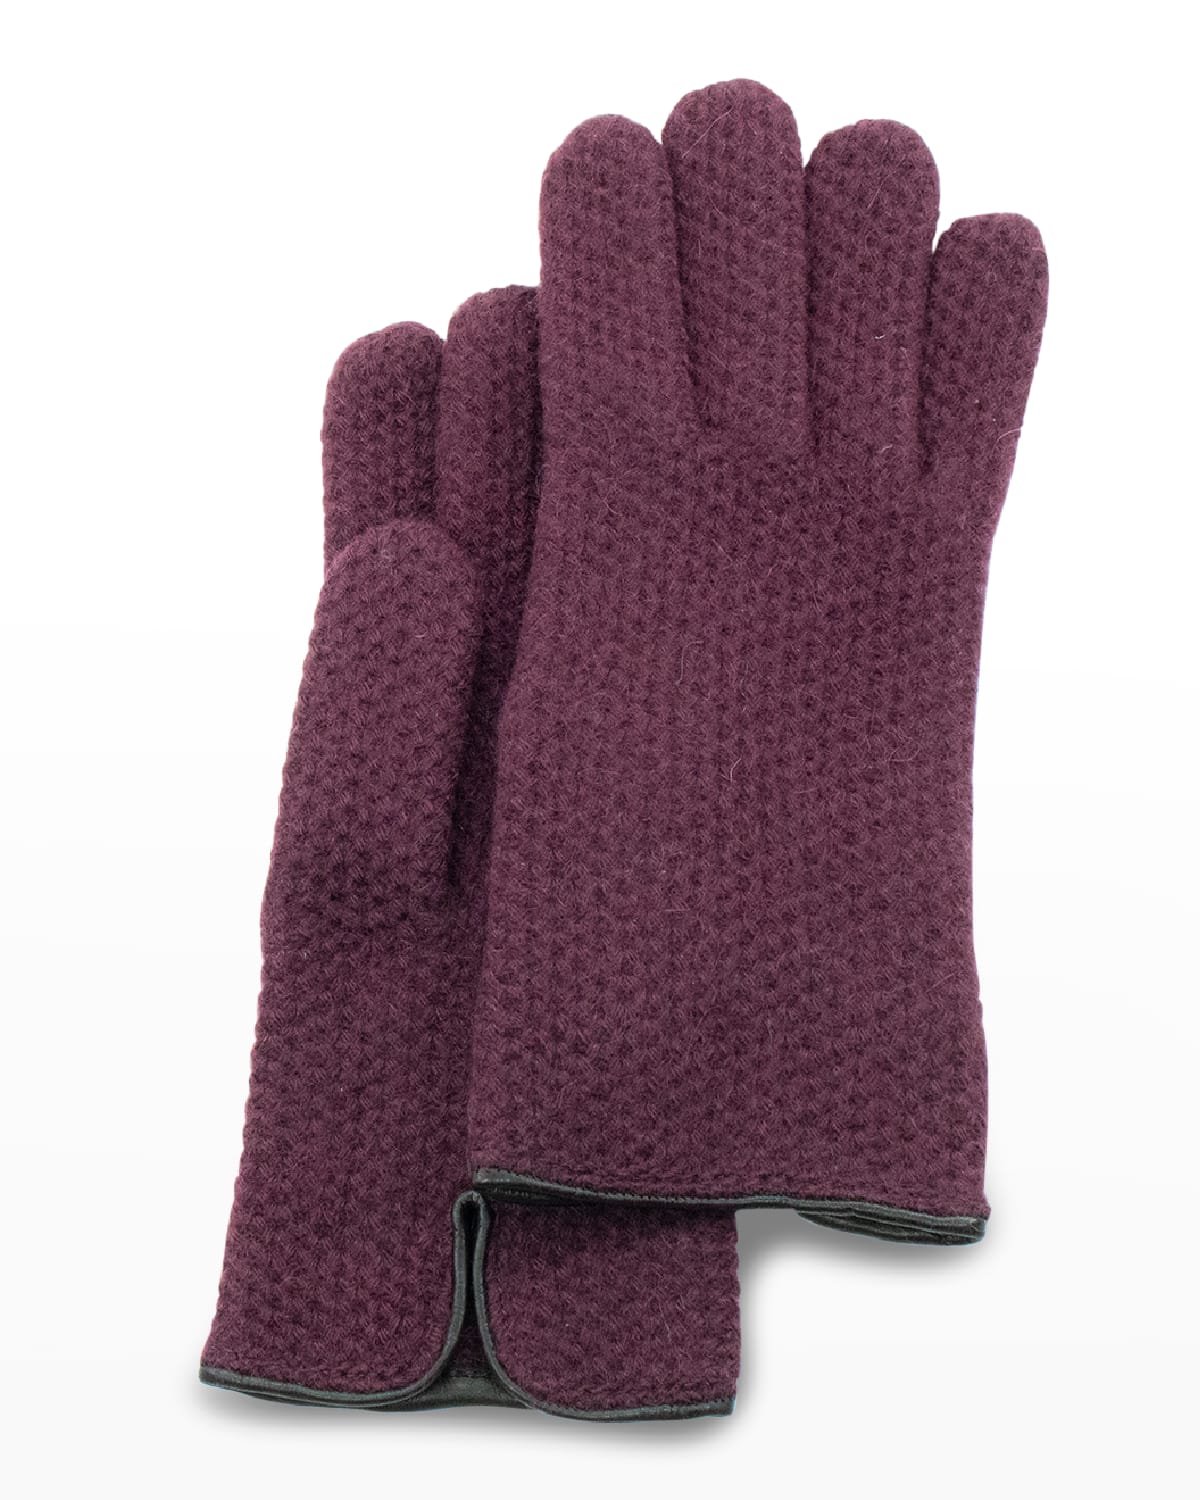 Portolano Honeycomb Stitched Cashmere Gloves In Black Currant